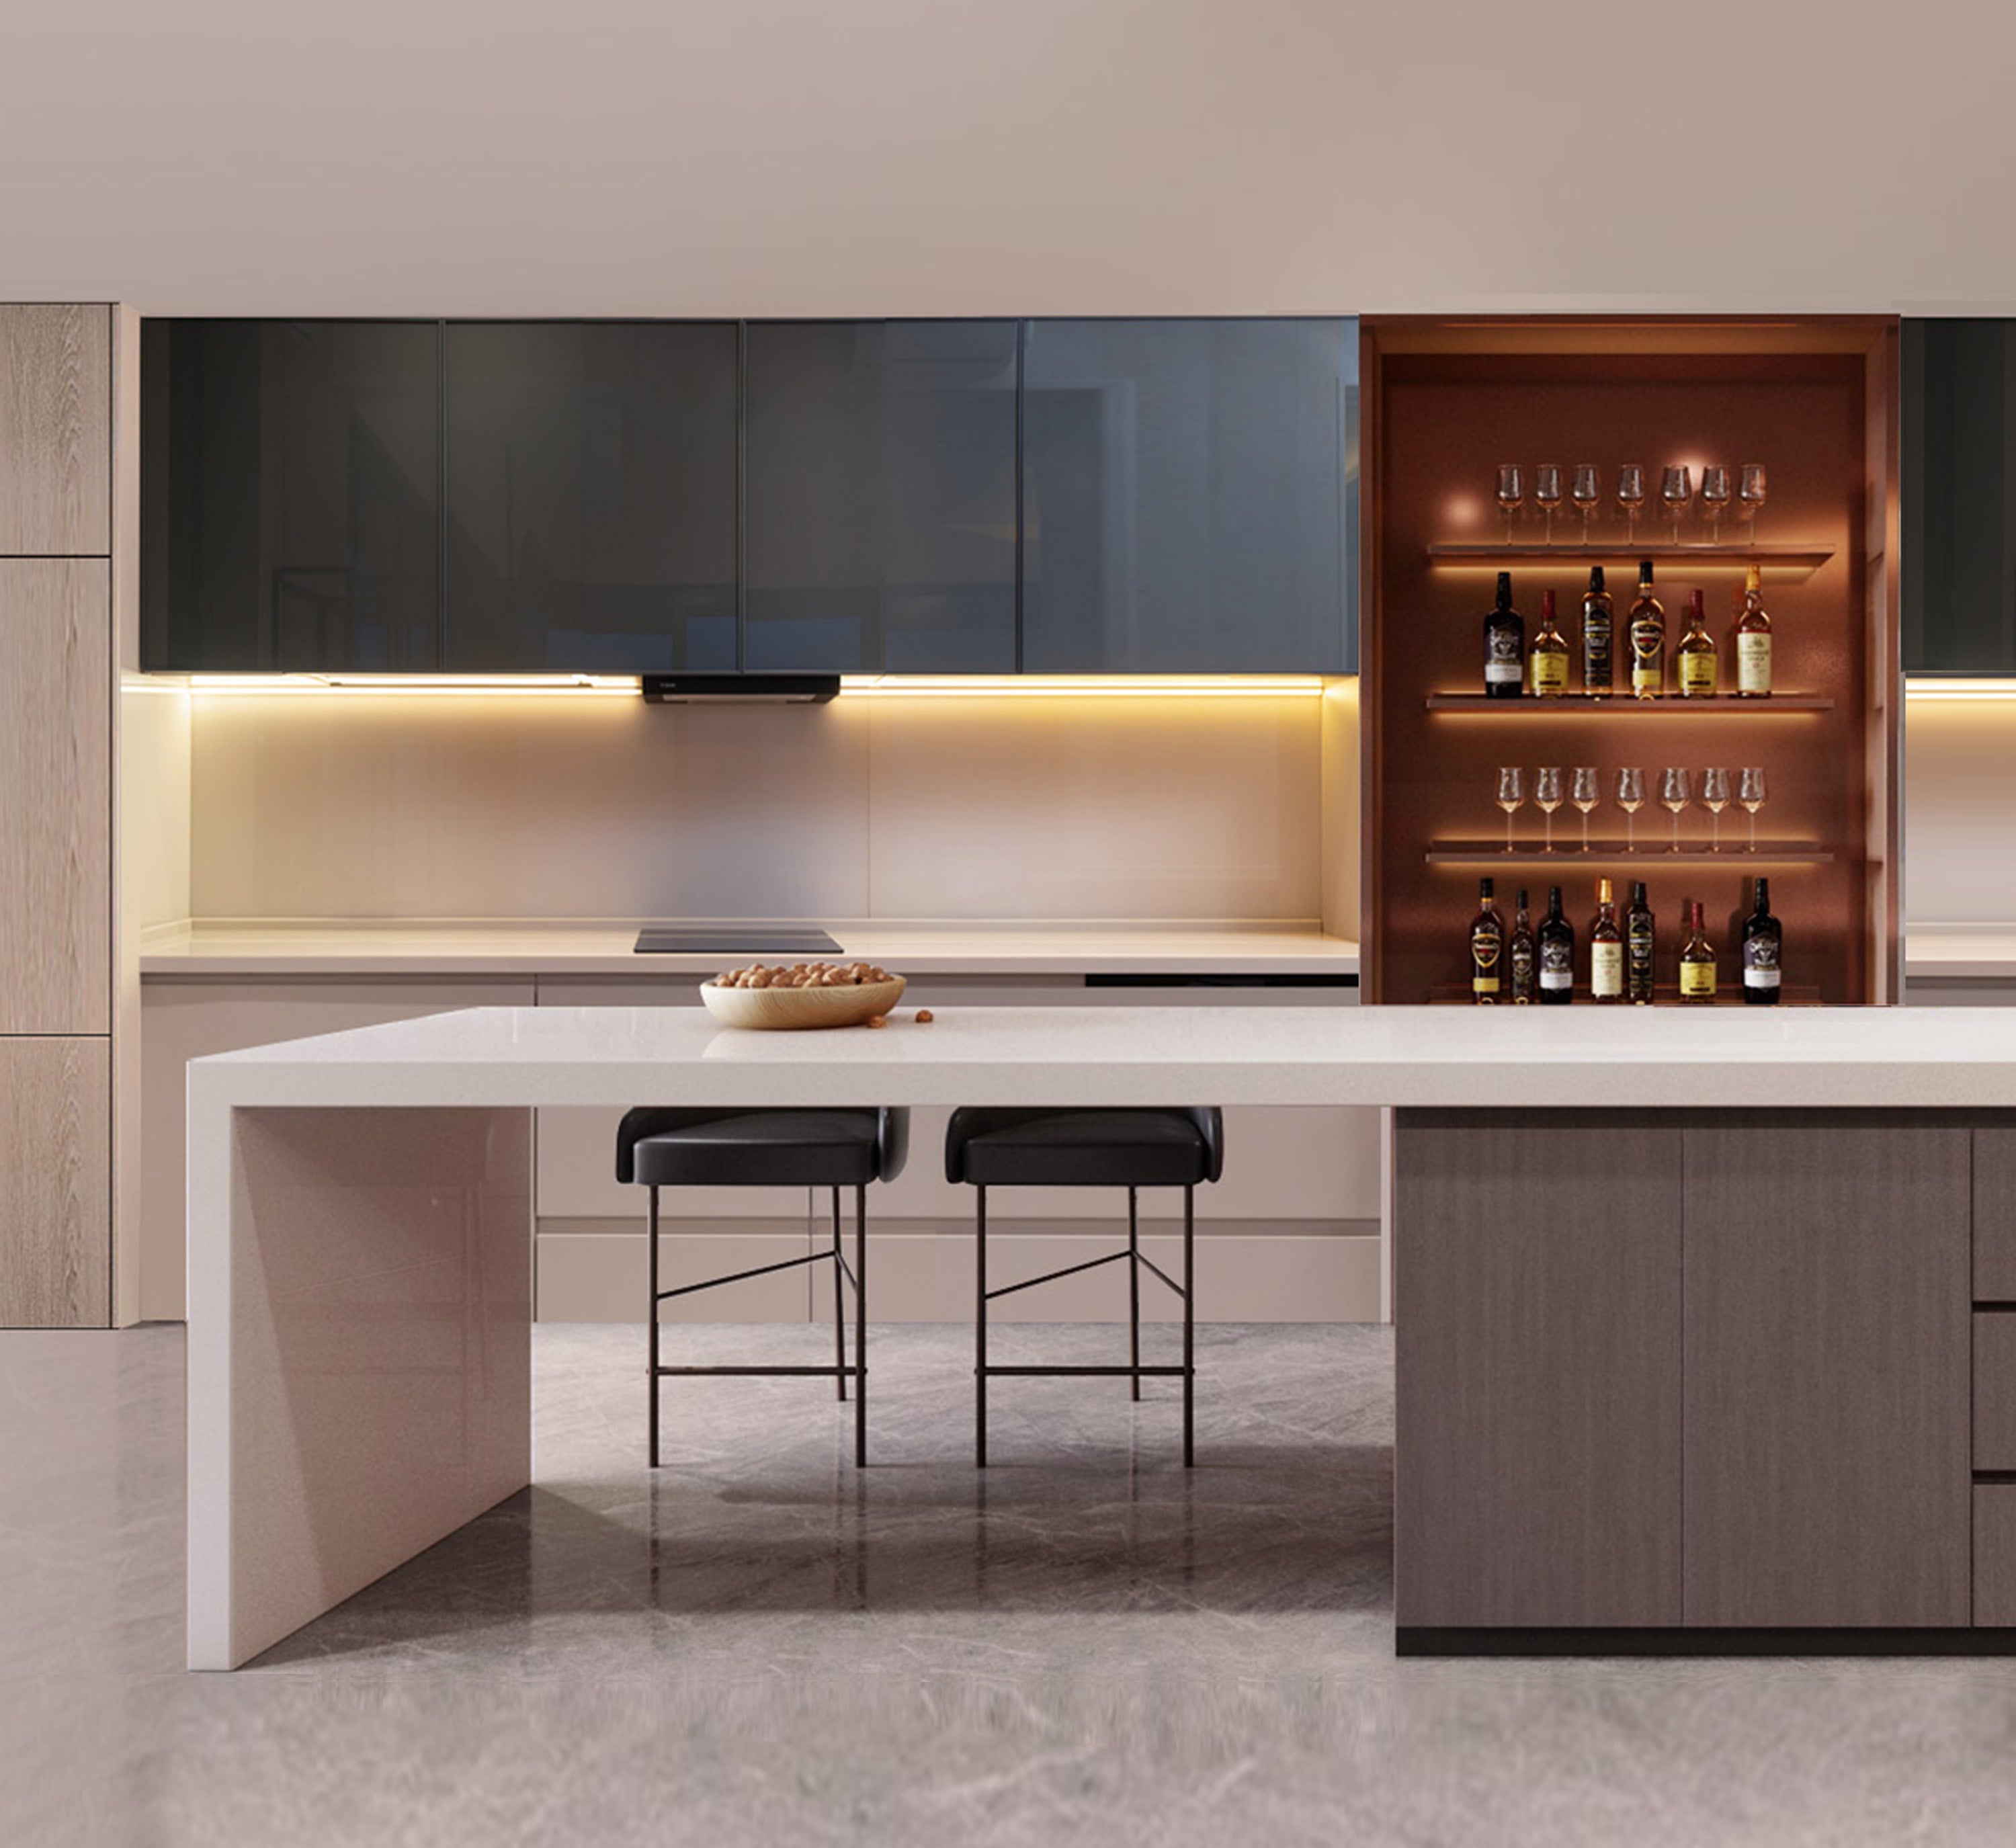 A contemporary kitchen with under-cabinet lighting highlighting a sleek, grey cabinetry with a reflective backsplash and a white stone countertop. An open display cabinet with internal lighting presents an array of liquor bottles and glasses, while two modern black bar stools sit at the kitchen island, and a bowl of bread adds a homely touch.